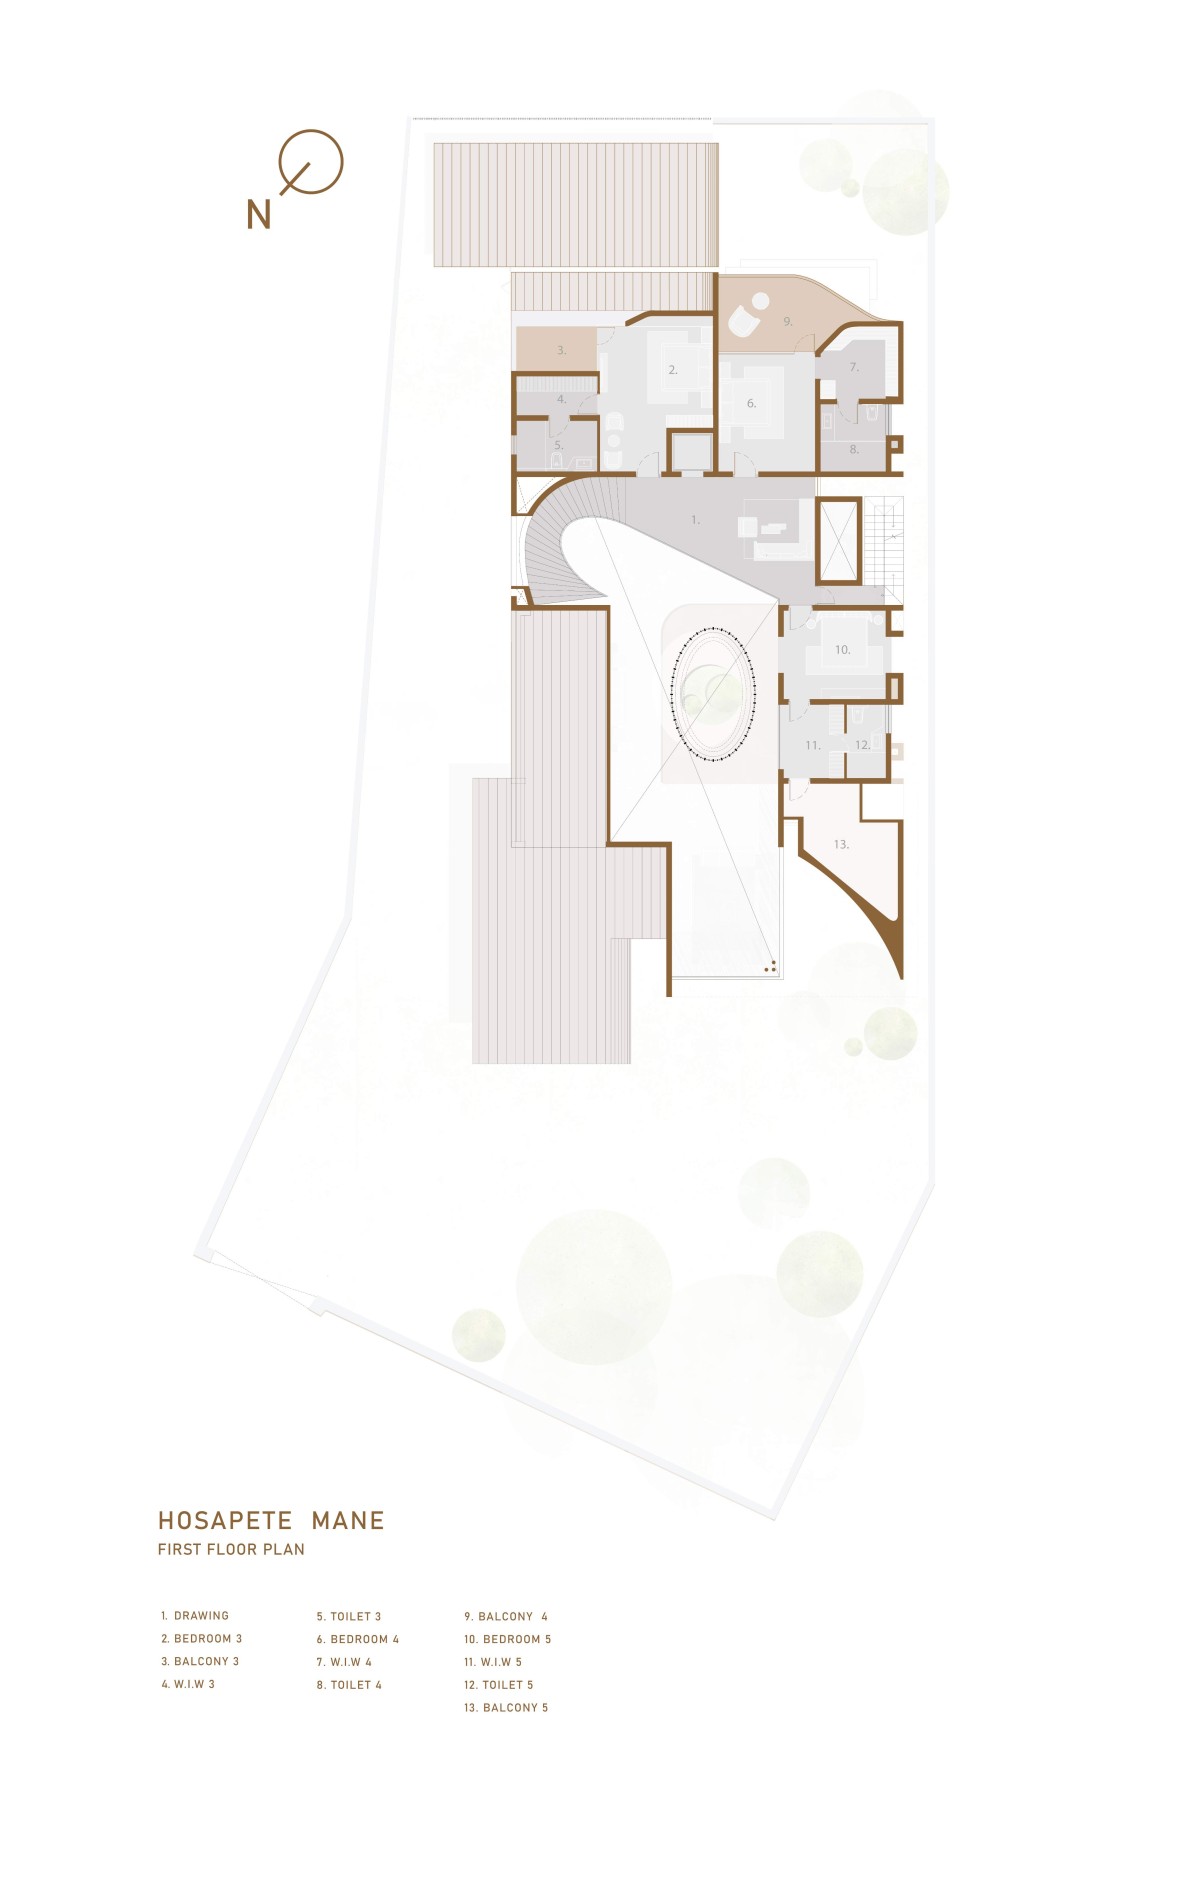 First floor plan of Hosapete Mane by Cadence Architects